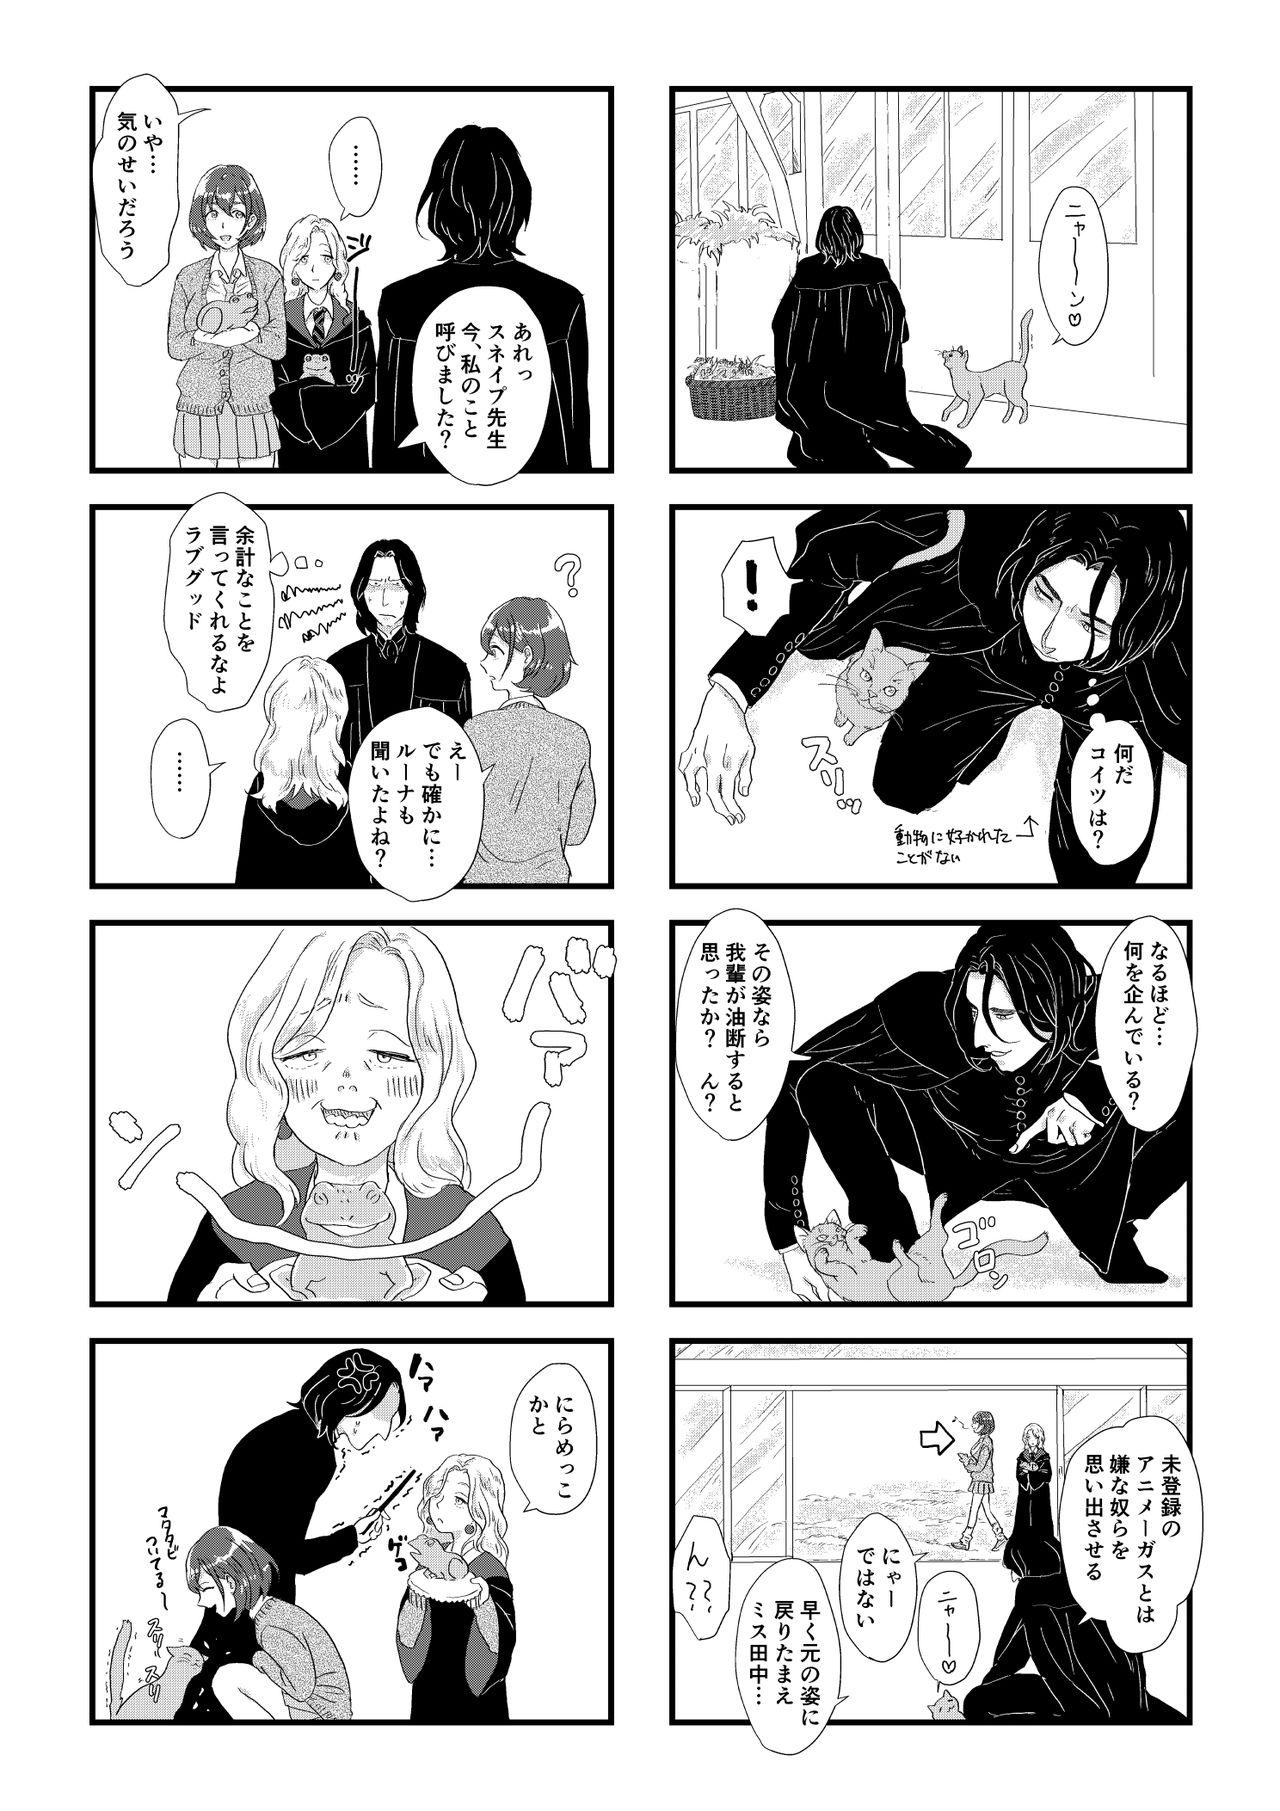 Prostitute Professor Snape and the Hufflepuff transfer student - Harry potter Atm - Page 11